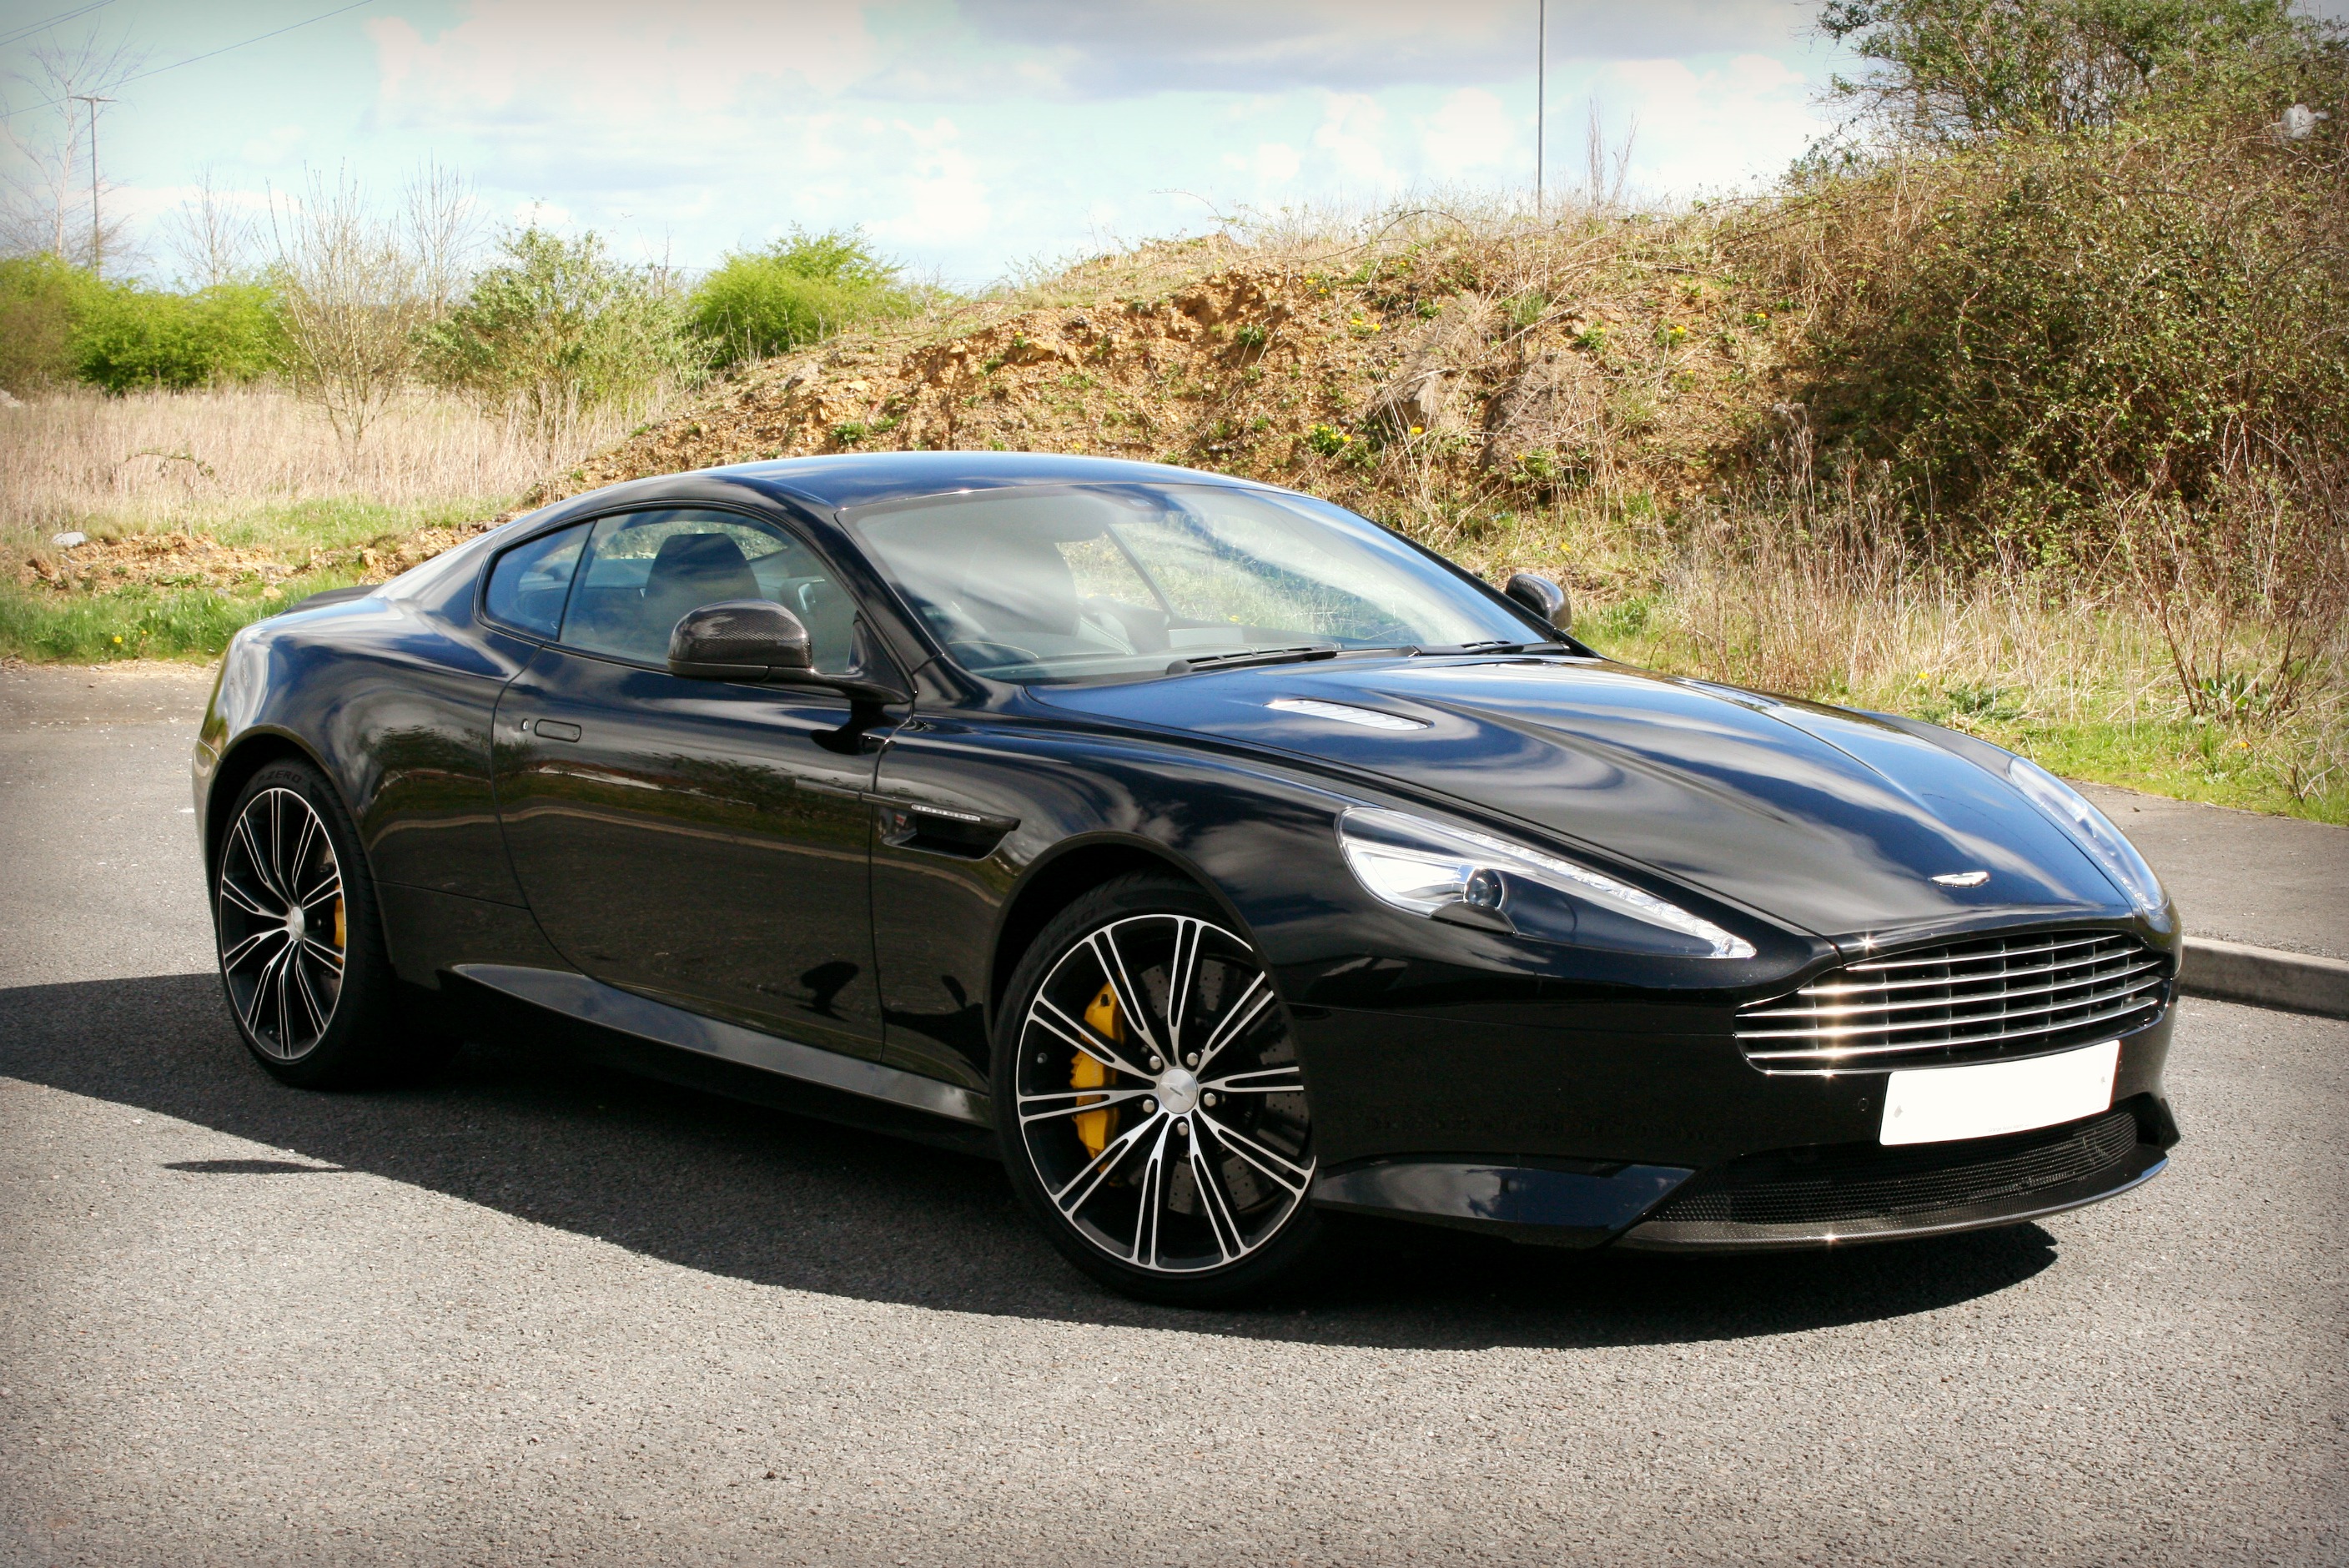 Aston Martin DB9 Plymouth Drive South West Luxury Prestige amp Sports car hire in Wiltshire 